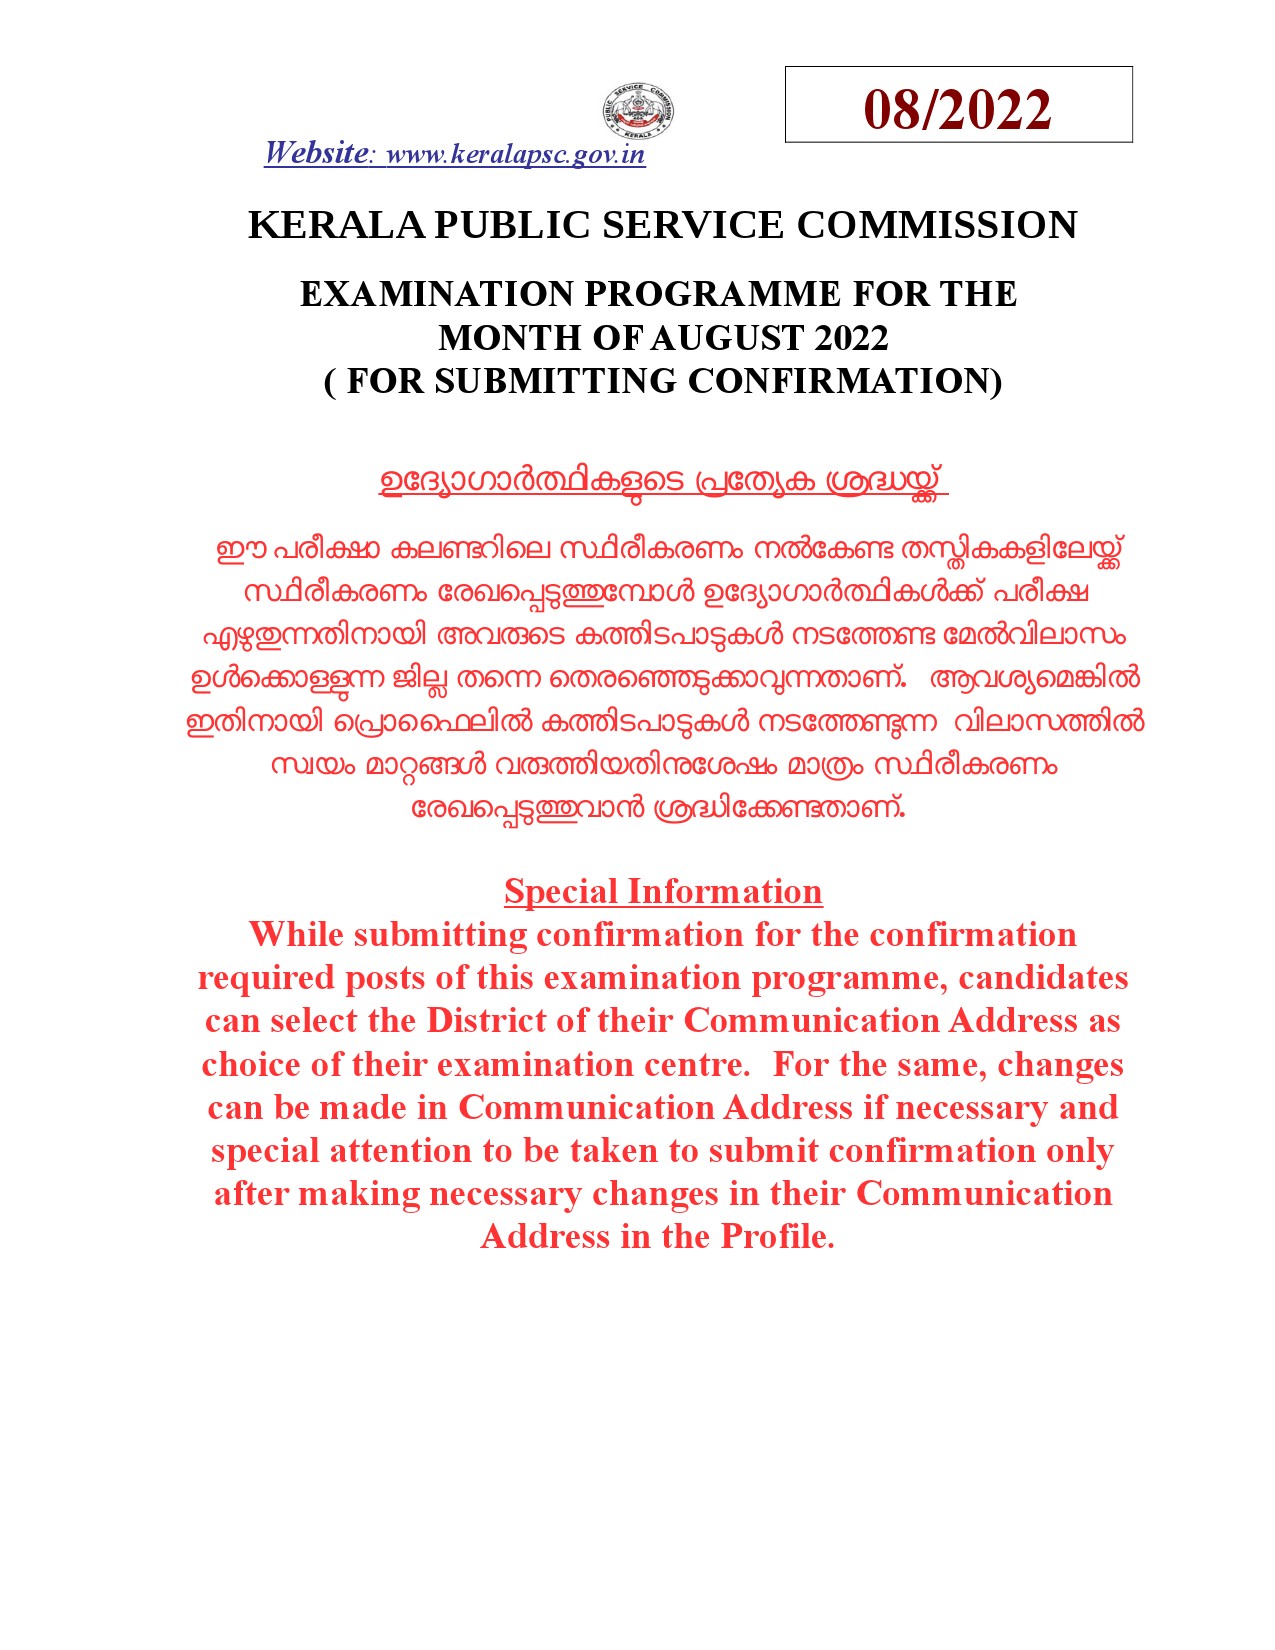 KPSC EXAMINATION PROGRAMME FOR THE MONTH OF AUGUST 2022 - Notification Image 1